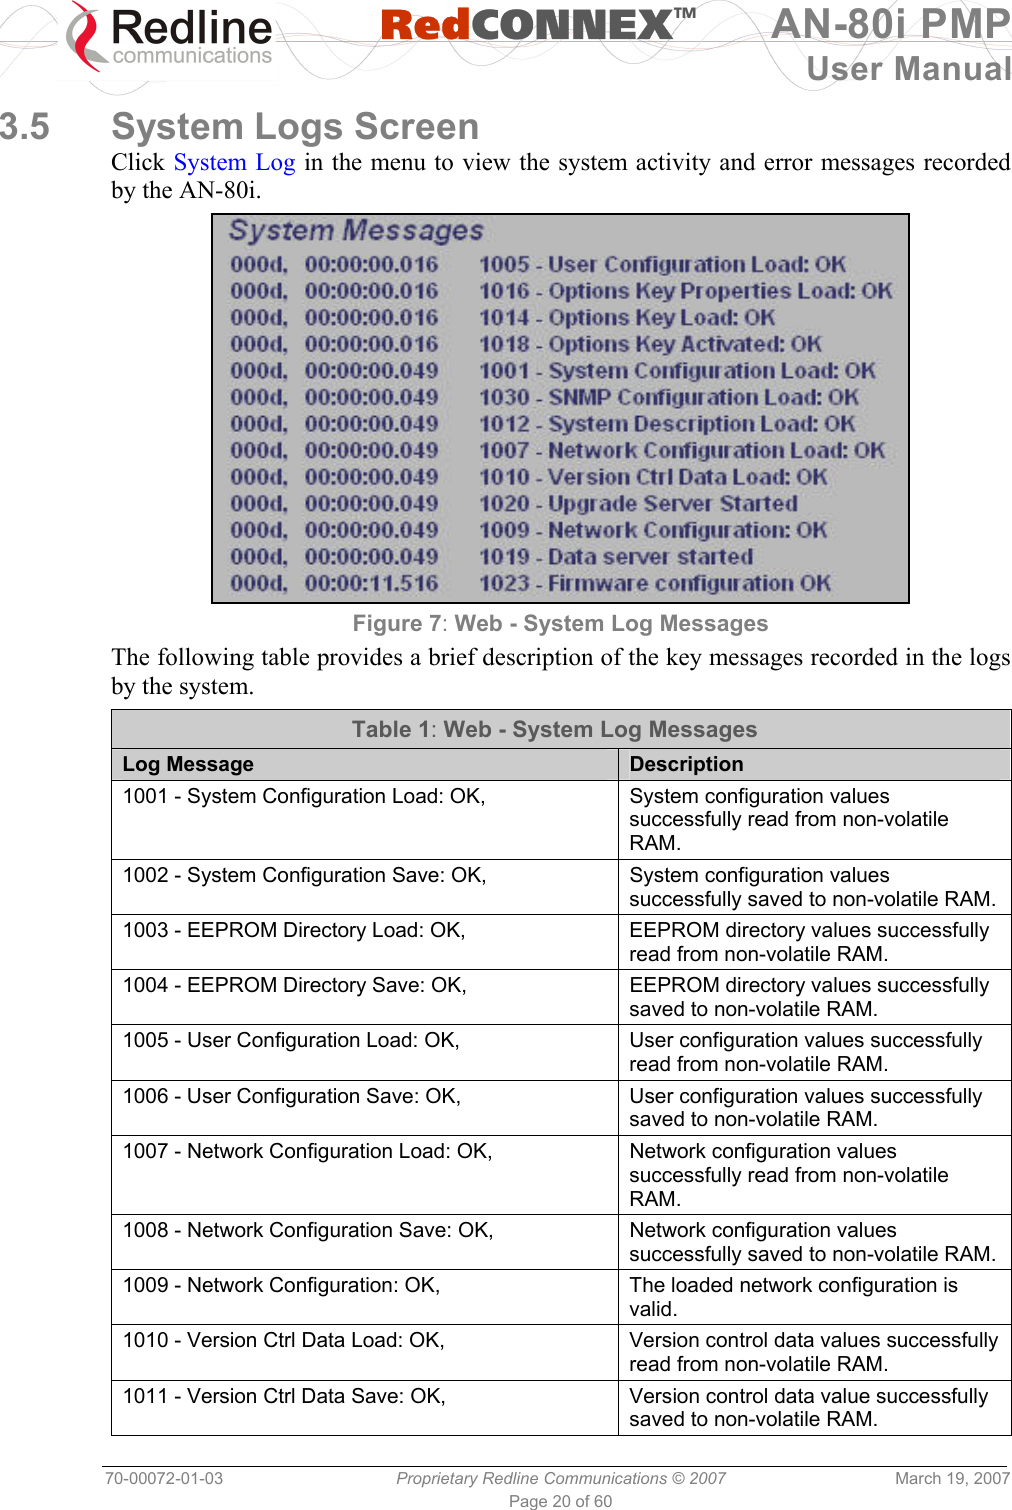   RedCONNEXTM AN-80i PMP User Manual 70-00072-01-03  Proprietary Redline Communications © 2007  March 19, 2007 Page 20 of 60  3.5  System Logs Screen Click System Log in the menu to view the system activity and error messages recorded by the AN-80i.  Figure 7: Web - System Log Messages The following table provides a brief description of the key messages recorded in the logs by the system. Table 1: Web - System Log Messages Log Message  Description 1001 - System Configuration Load: OK,  System configuration values successfully read from non-volatile RAM. 1002 - System Configuration Save: OK,  System configuration values successfully saved to non-volatile RAM. 1003 - EEPROM Directory Load: OK,  EEPROM directory values successfully read from non-volatile RAM. 1004 - EEPROM Directory Save: OK,  EEPROM directory values successfully saved to non-volatile RAM. 1005 - User Configuration Load: OK,  User configuration values successfully read from non-volatile RAM. 1006 - User Configuration Save: OK,  User configuration values successfully saved to non-volatile RAM. 1007 - Network Configuration Load: OK,  Network configuration values successfully read from non-volatile RAM. 1008 - Network Configuration Save: OK,  Network configuration values successfully saved to non-volatile RAM. 1009 - Network Configuration: OK,  The loaded network configuration is valid. 1010 - Version Ctrl Data Load: OK,  Version control data values successfully read from non-volatile RAM. 1011 - Version Ctrl Data Save: OK,  Version control data value successfully saved to non-volatile RAM. 